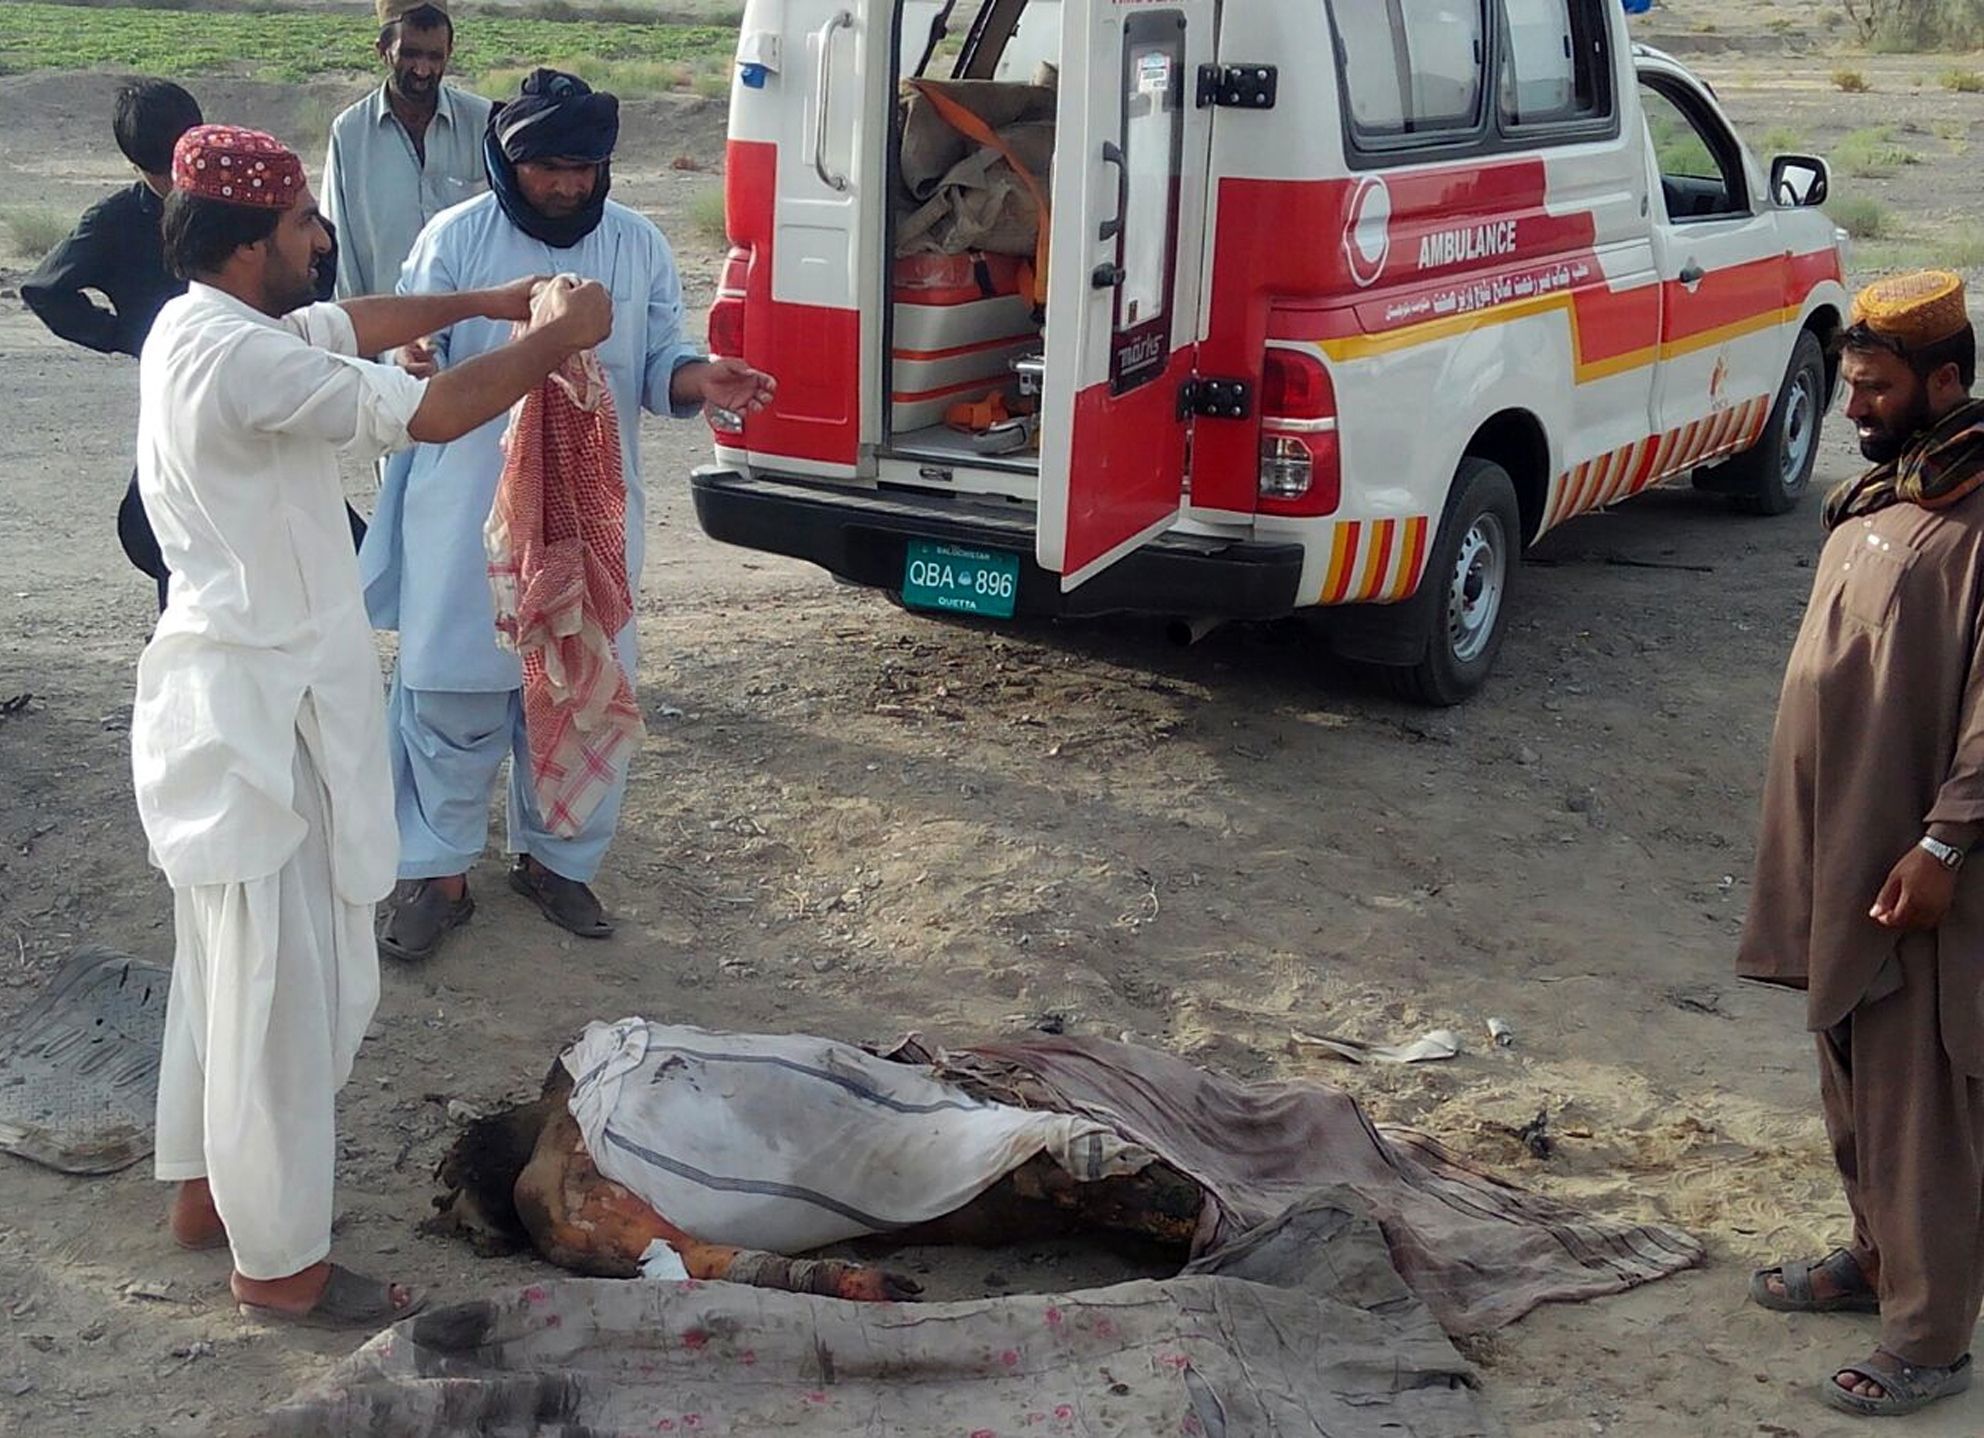 This photo taken by freelance photographer Abdul Malik on Saturday purports to show volunteers standing next to a dead body by the destroyed vehicle in which Mullah Mohammad Akhtar Mansour was allegedly traveling in the Ahmed Wal area in Baluchistan Province of Pakistan, near Afghanistan’s border.